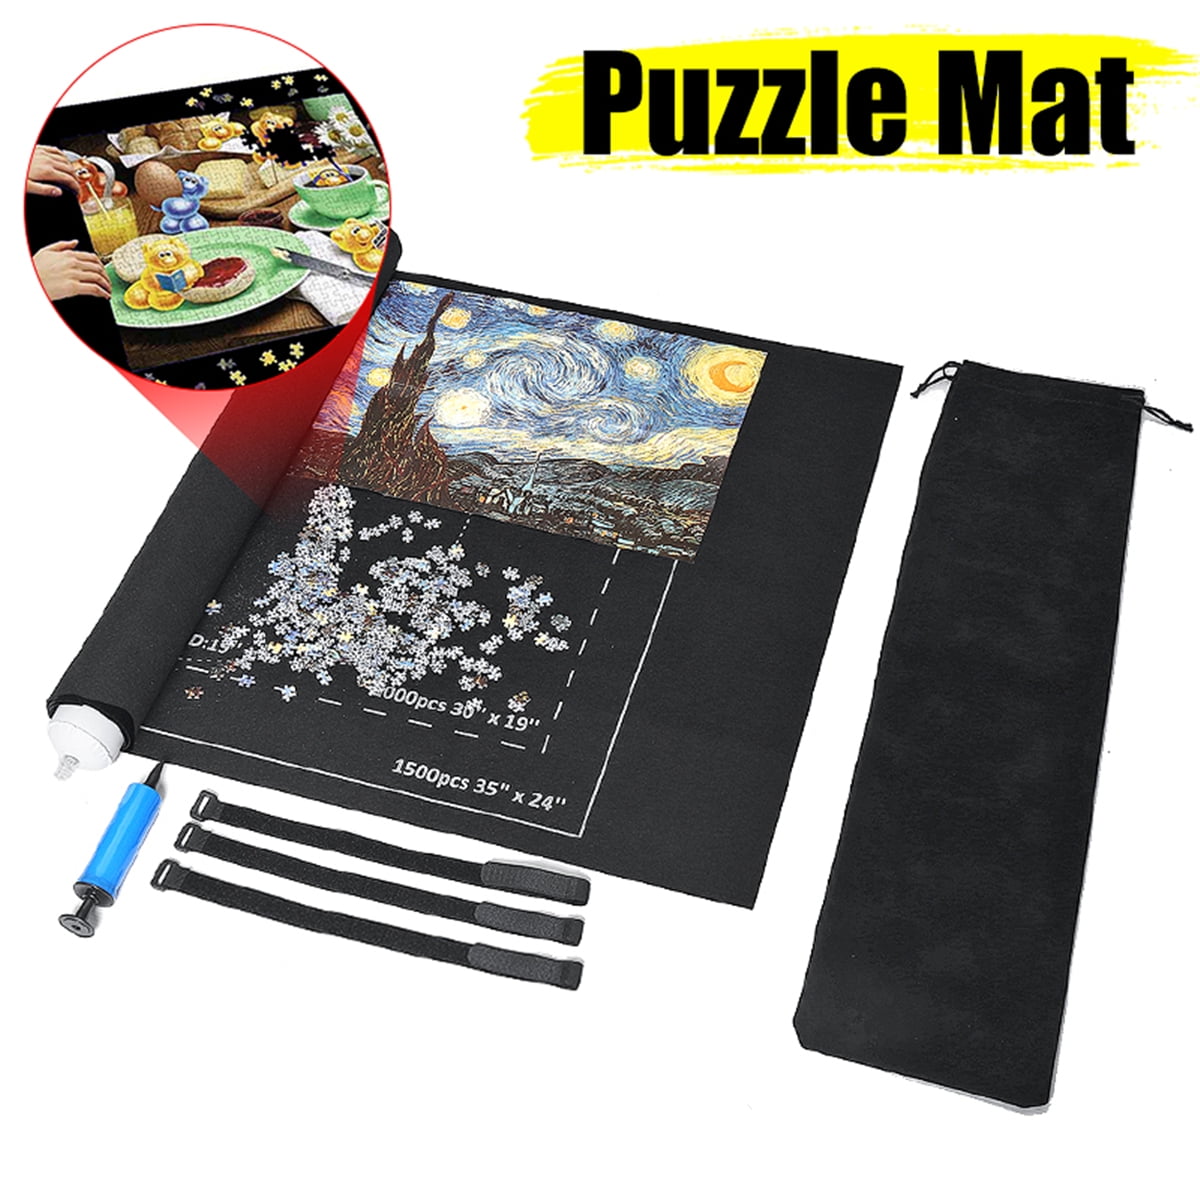 Kids Jigsaw Felt Storage Mat Roll Up Puzzle Game Blanket For Up To 1500 Pieces